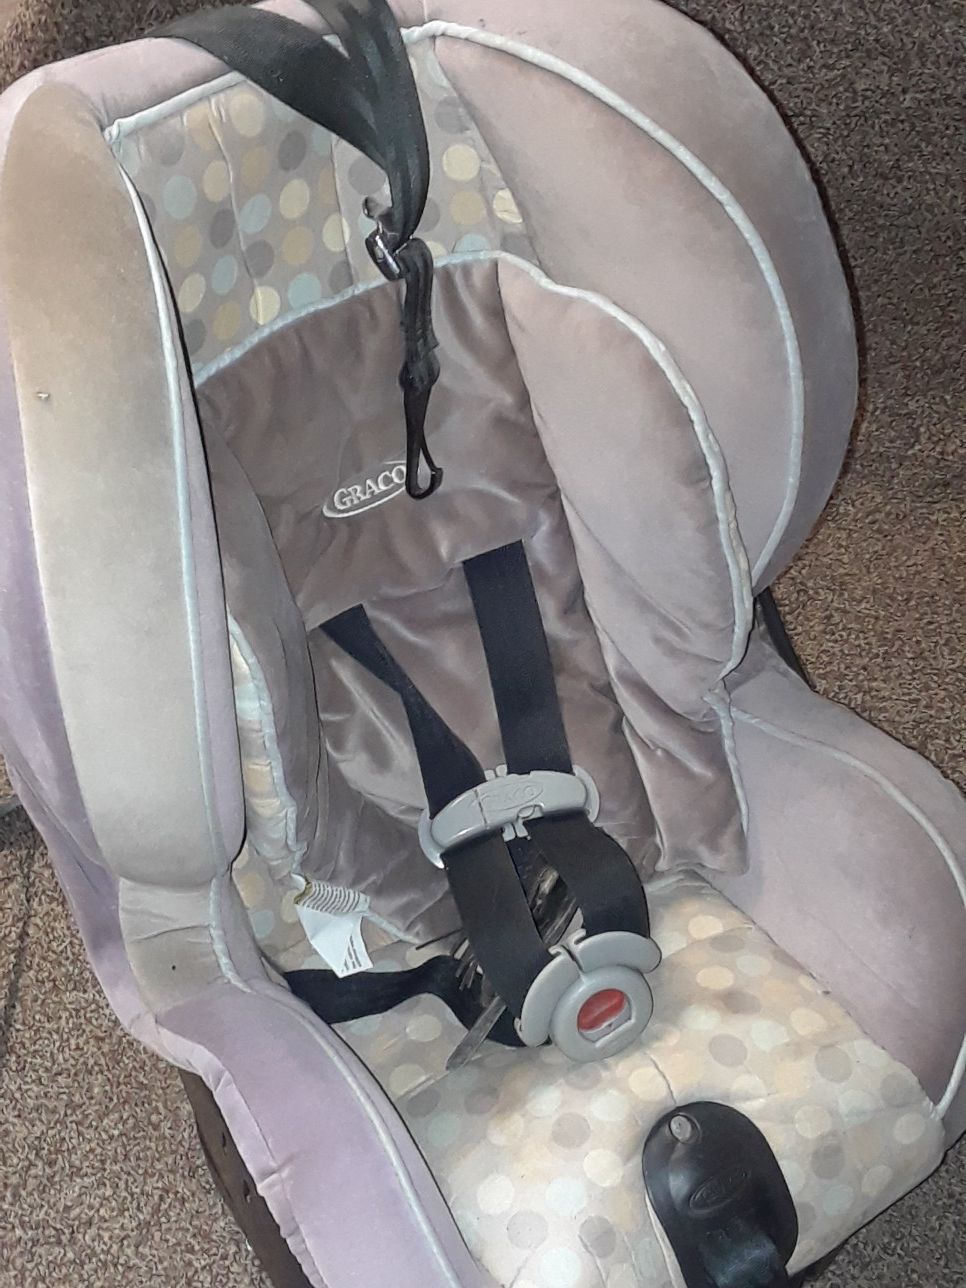 Graco car seat with matching headrest